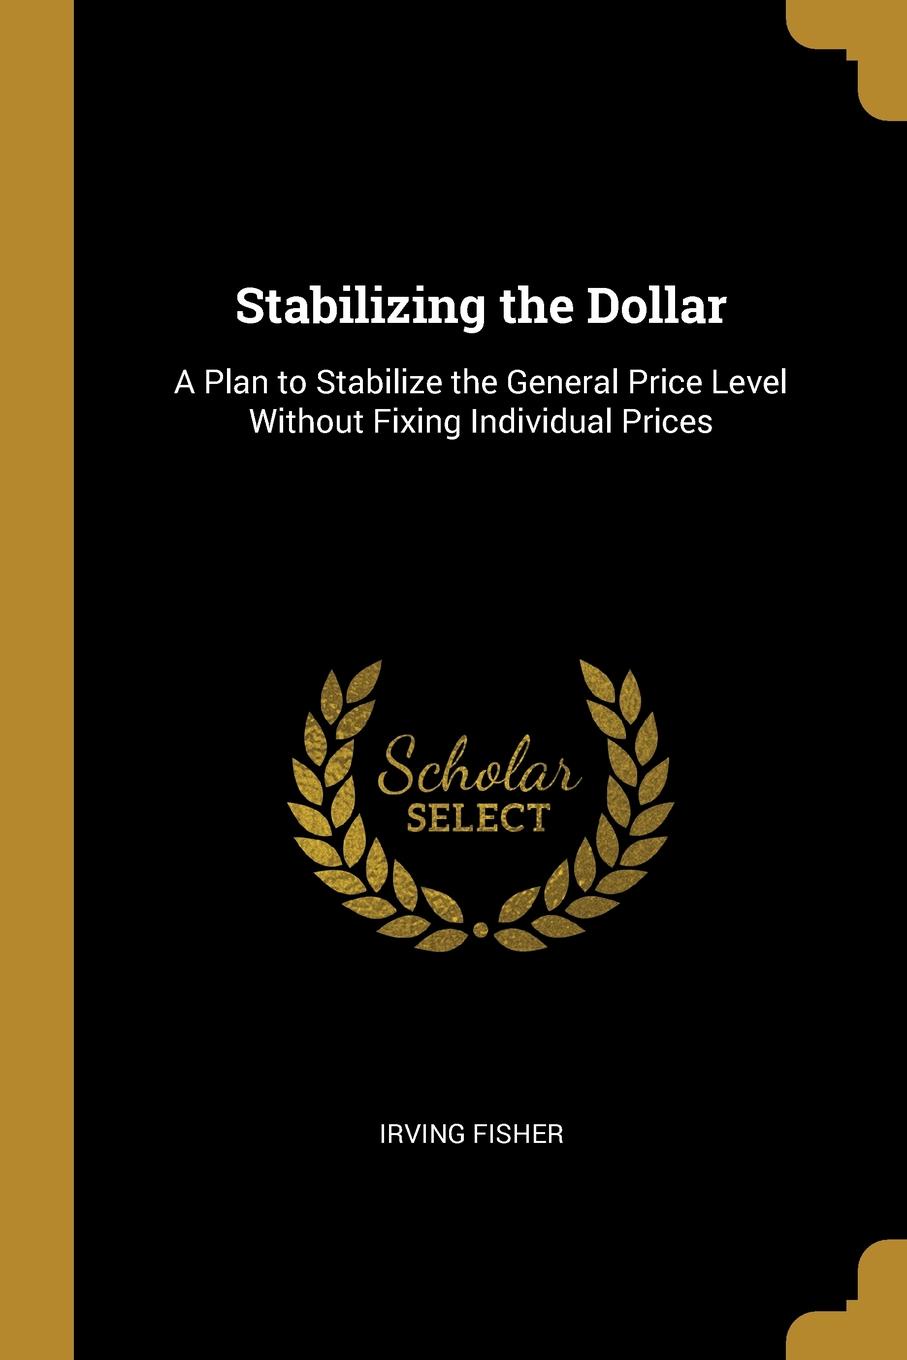 Stabilizing the Dollar. A Plan to Stabilize the General Price Level Without Fixing Individual Prices